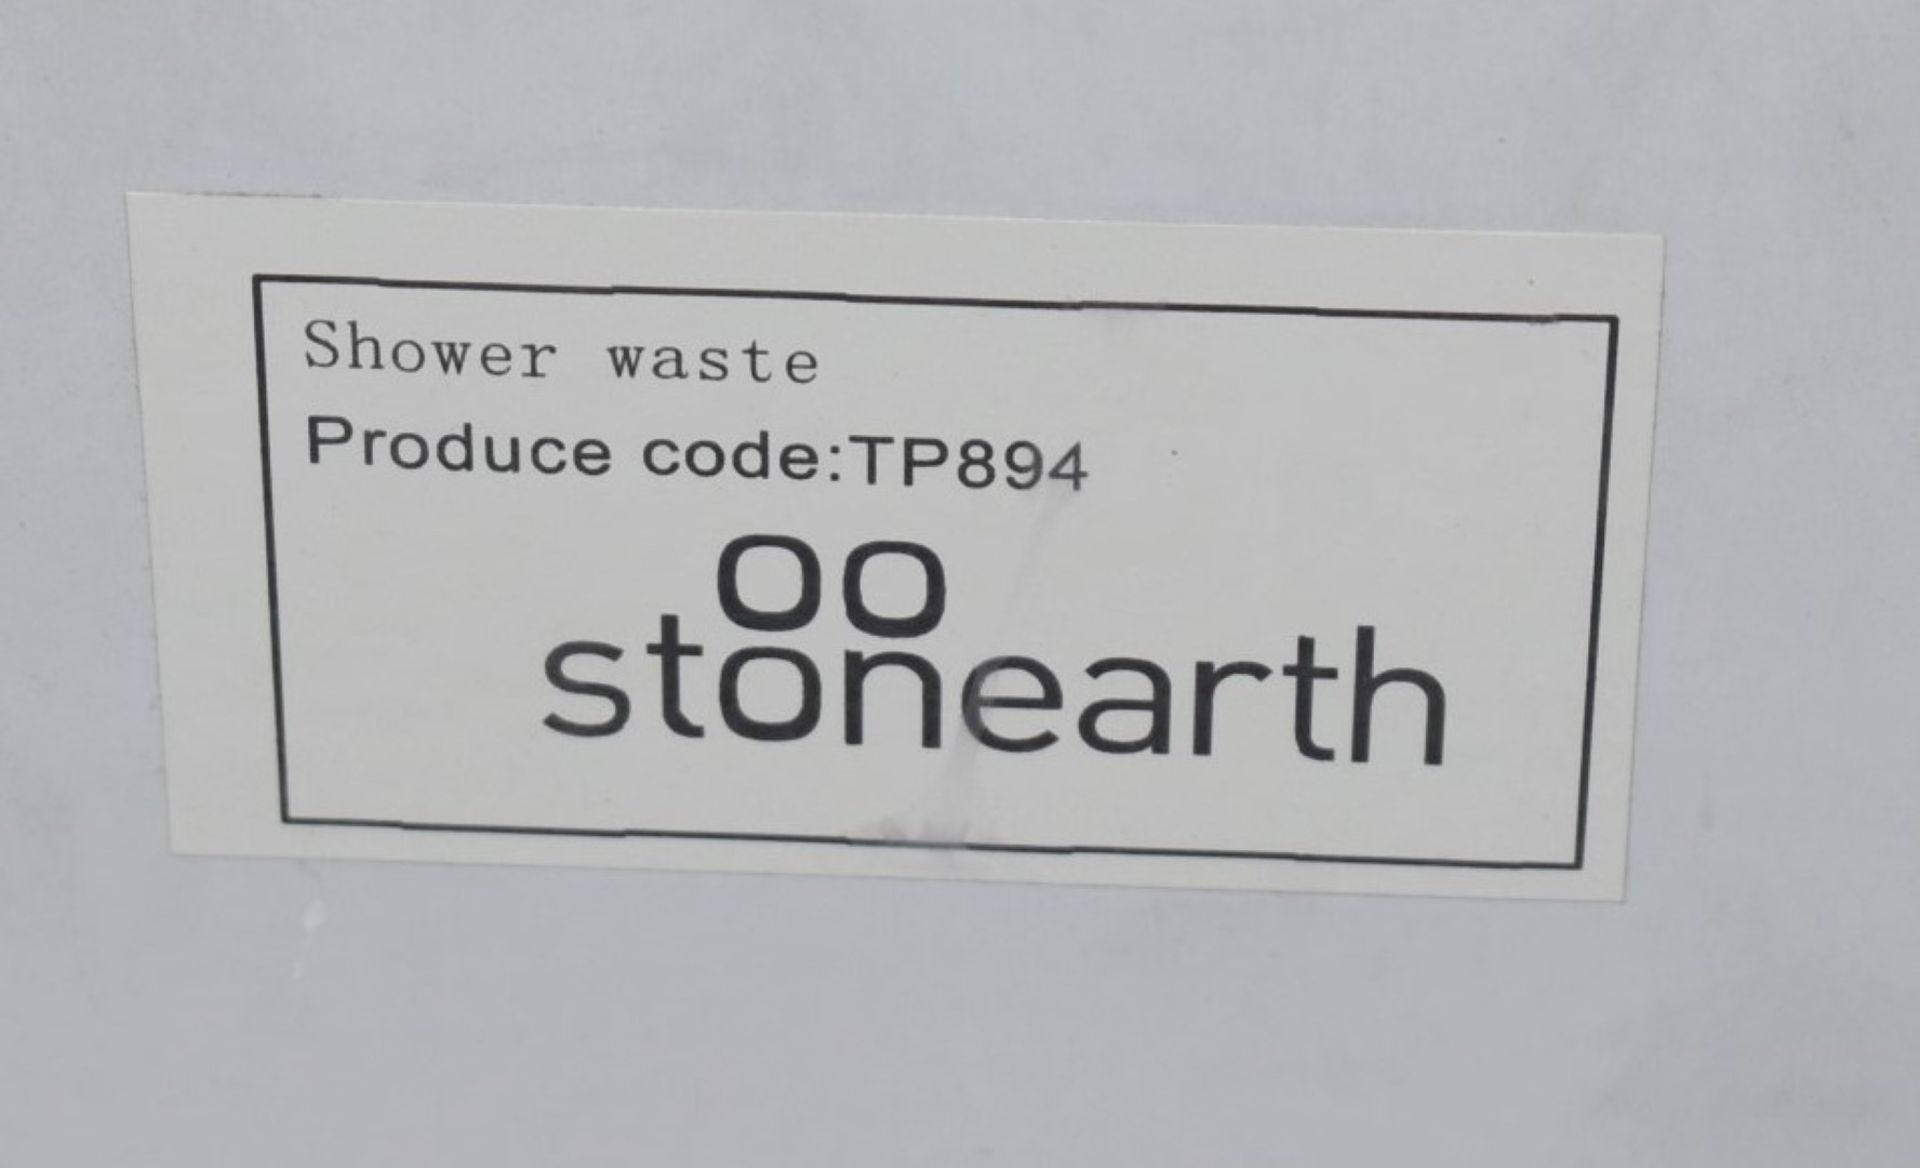 1 x Stonearth 90mm Shower Waste Kit With Stainless Steel Cover - Brand New & Boxed - RRP £99 - - Image 2 of 4